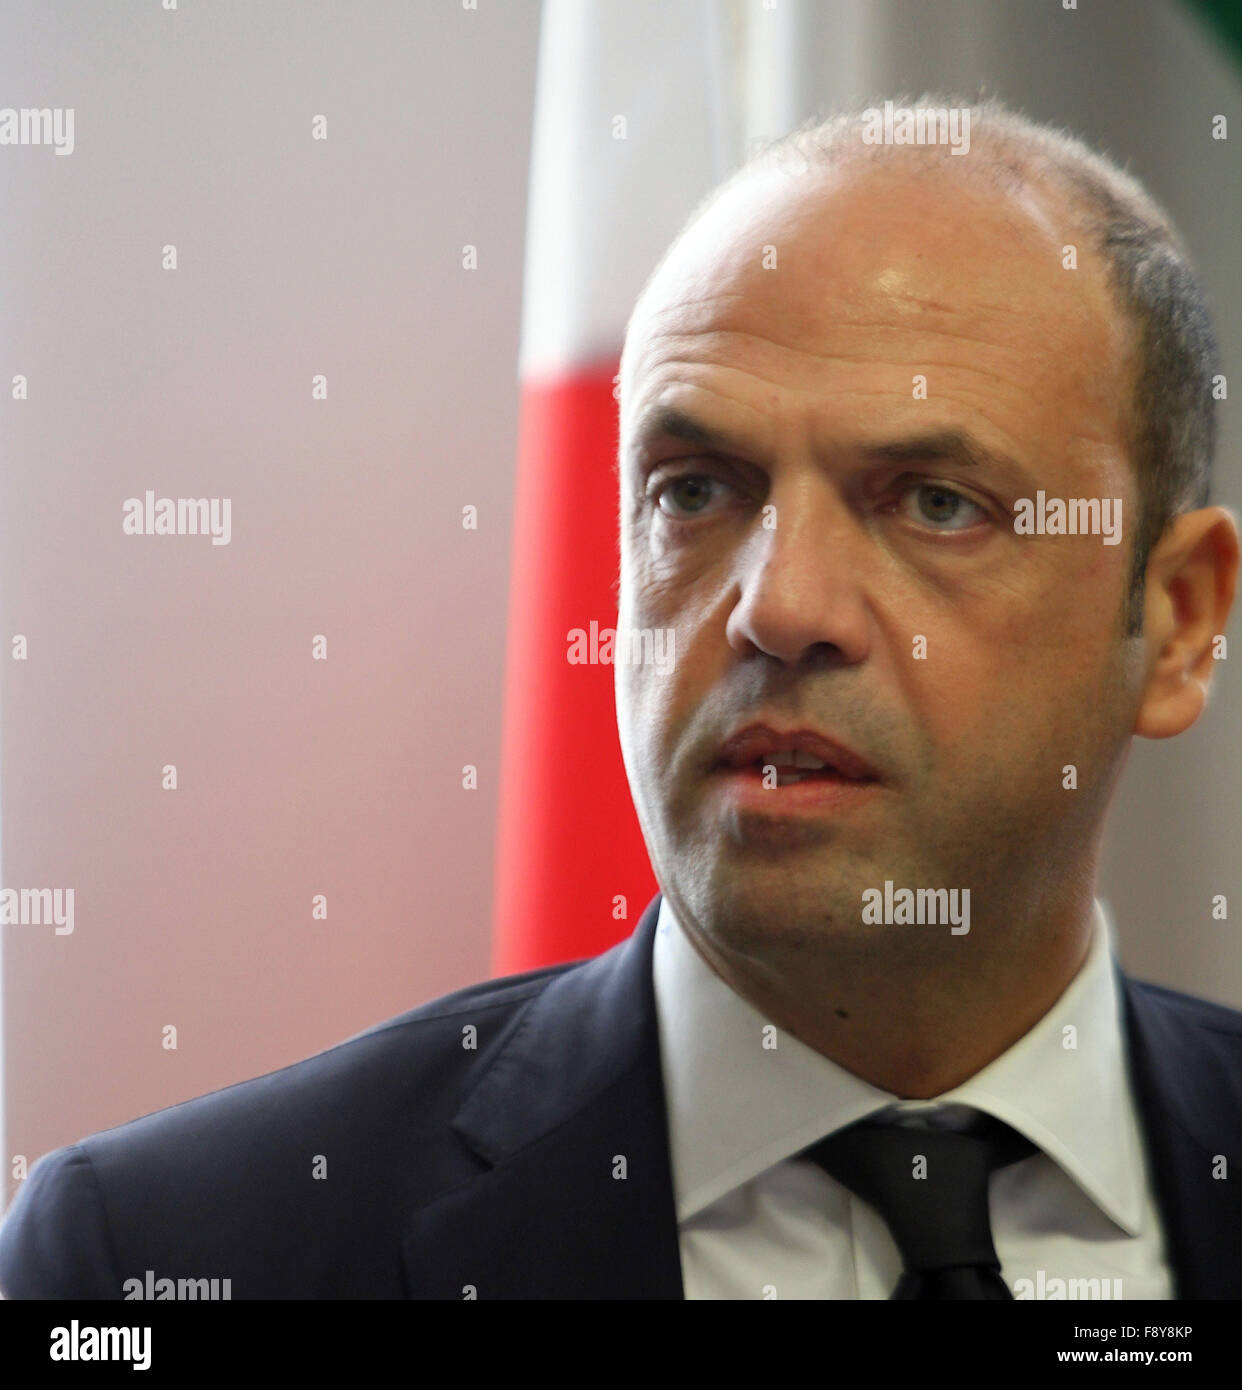 Pordenone, Italy. 12th December, 2015. The Minister of Interior of Italian  government Angelino Alfano attends during